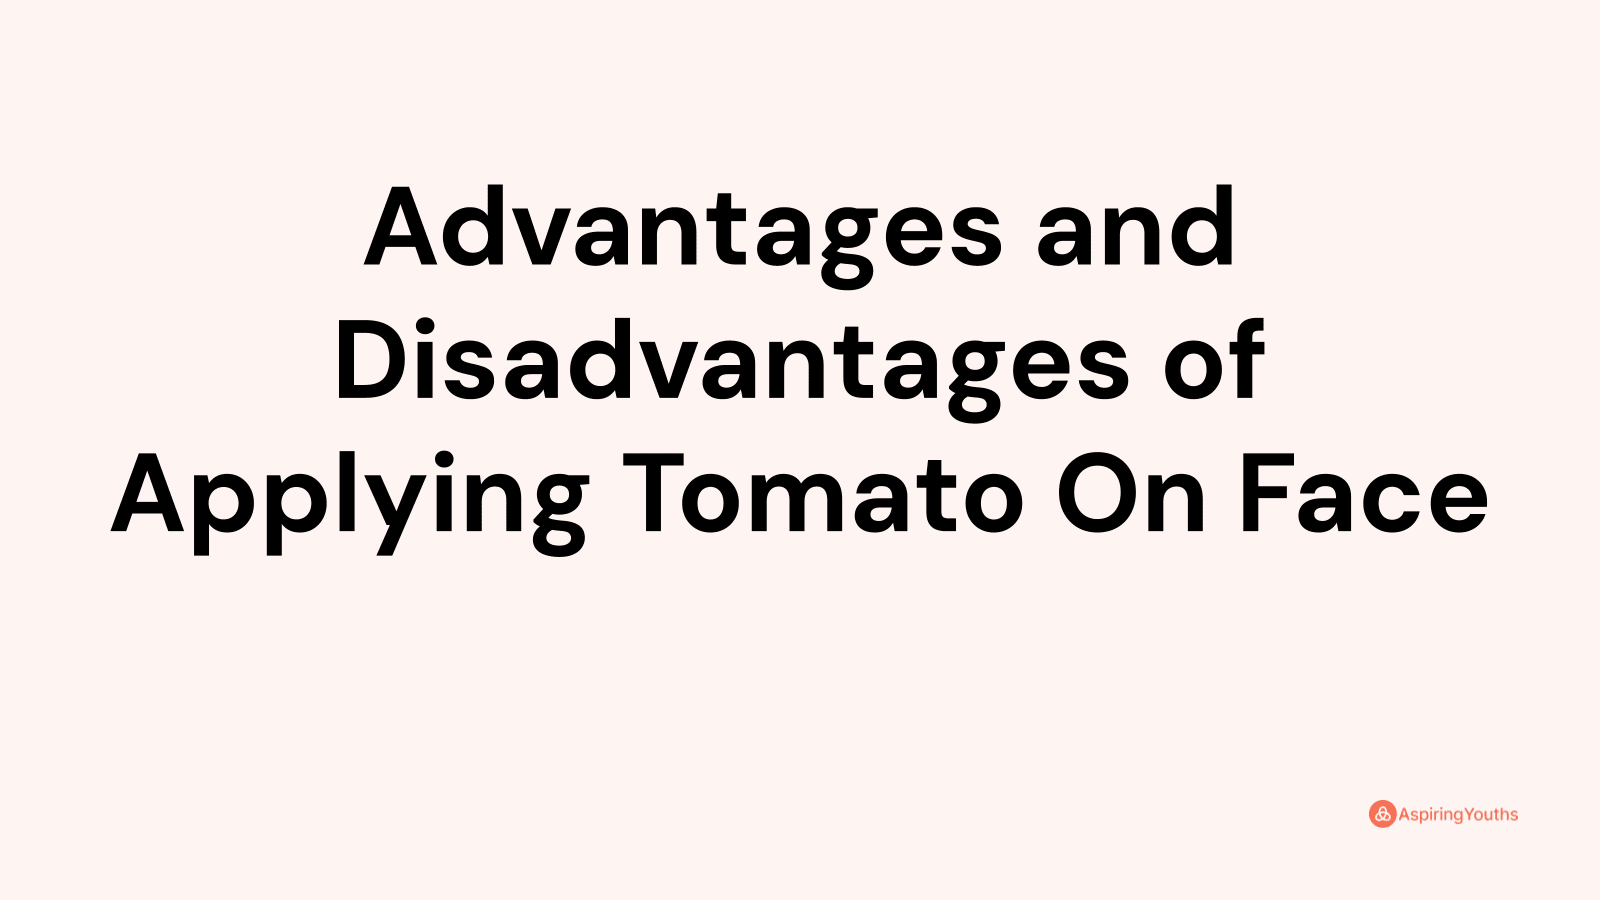 Advantages and disadvantages of Applying Tomato On Face